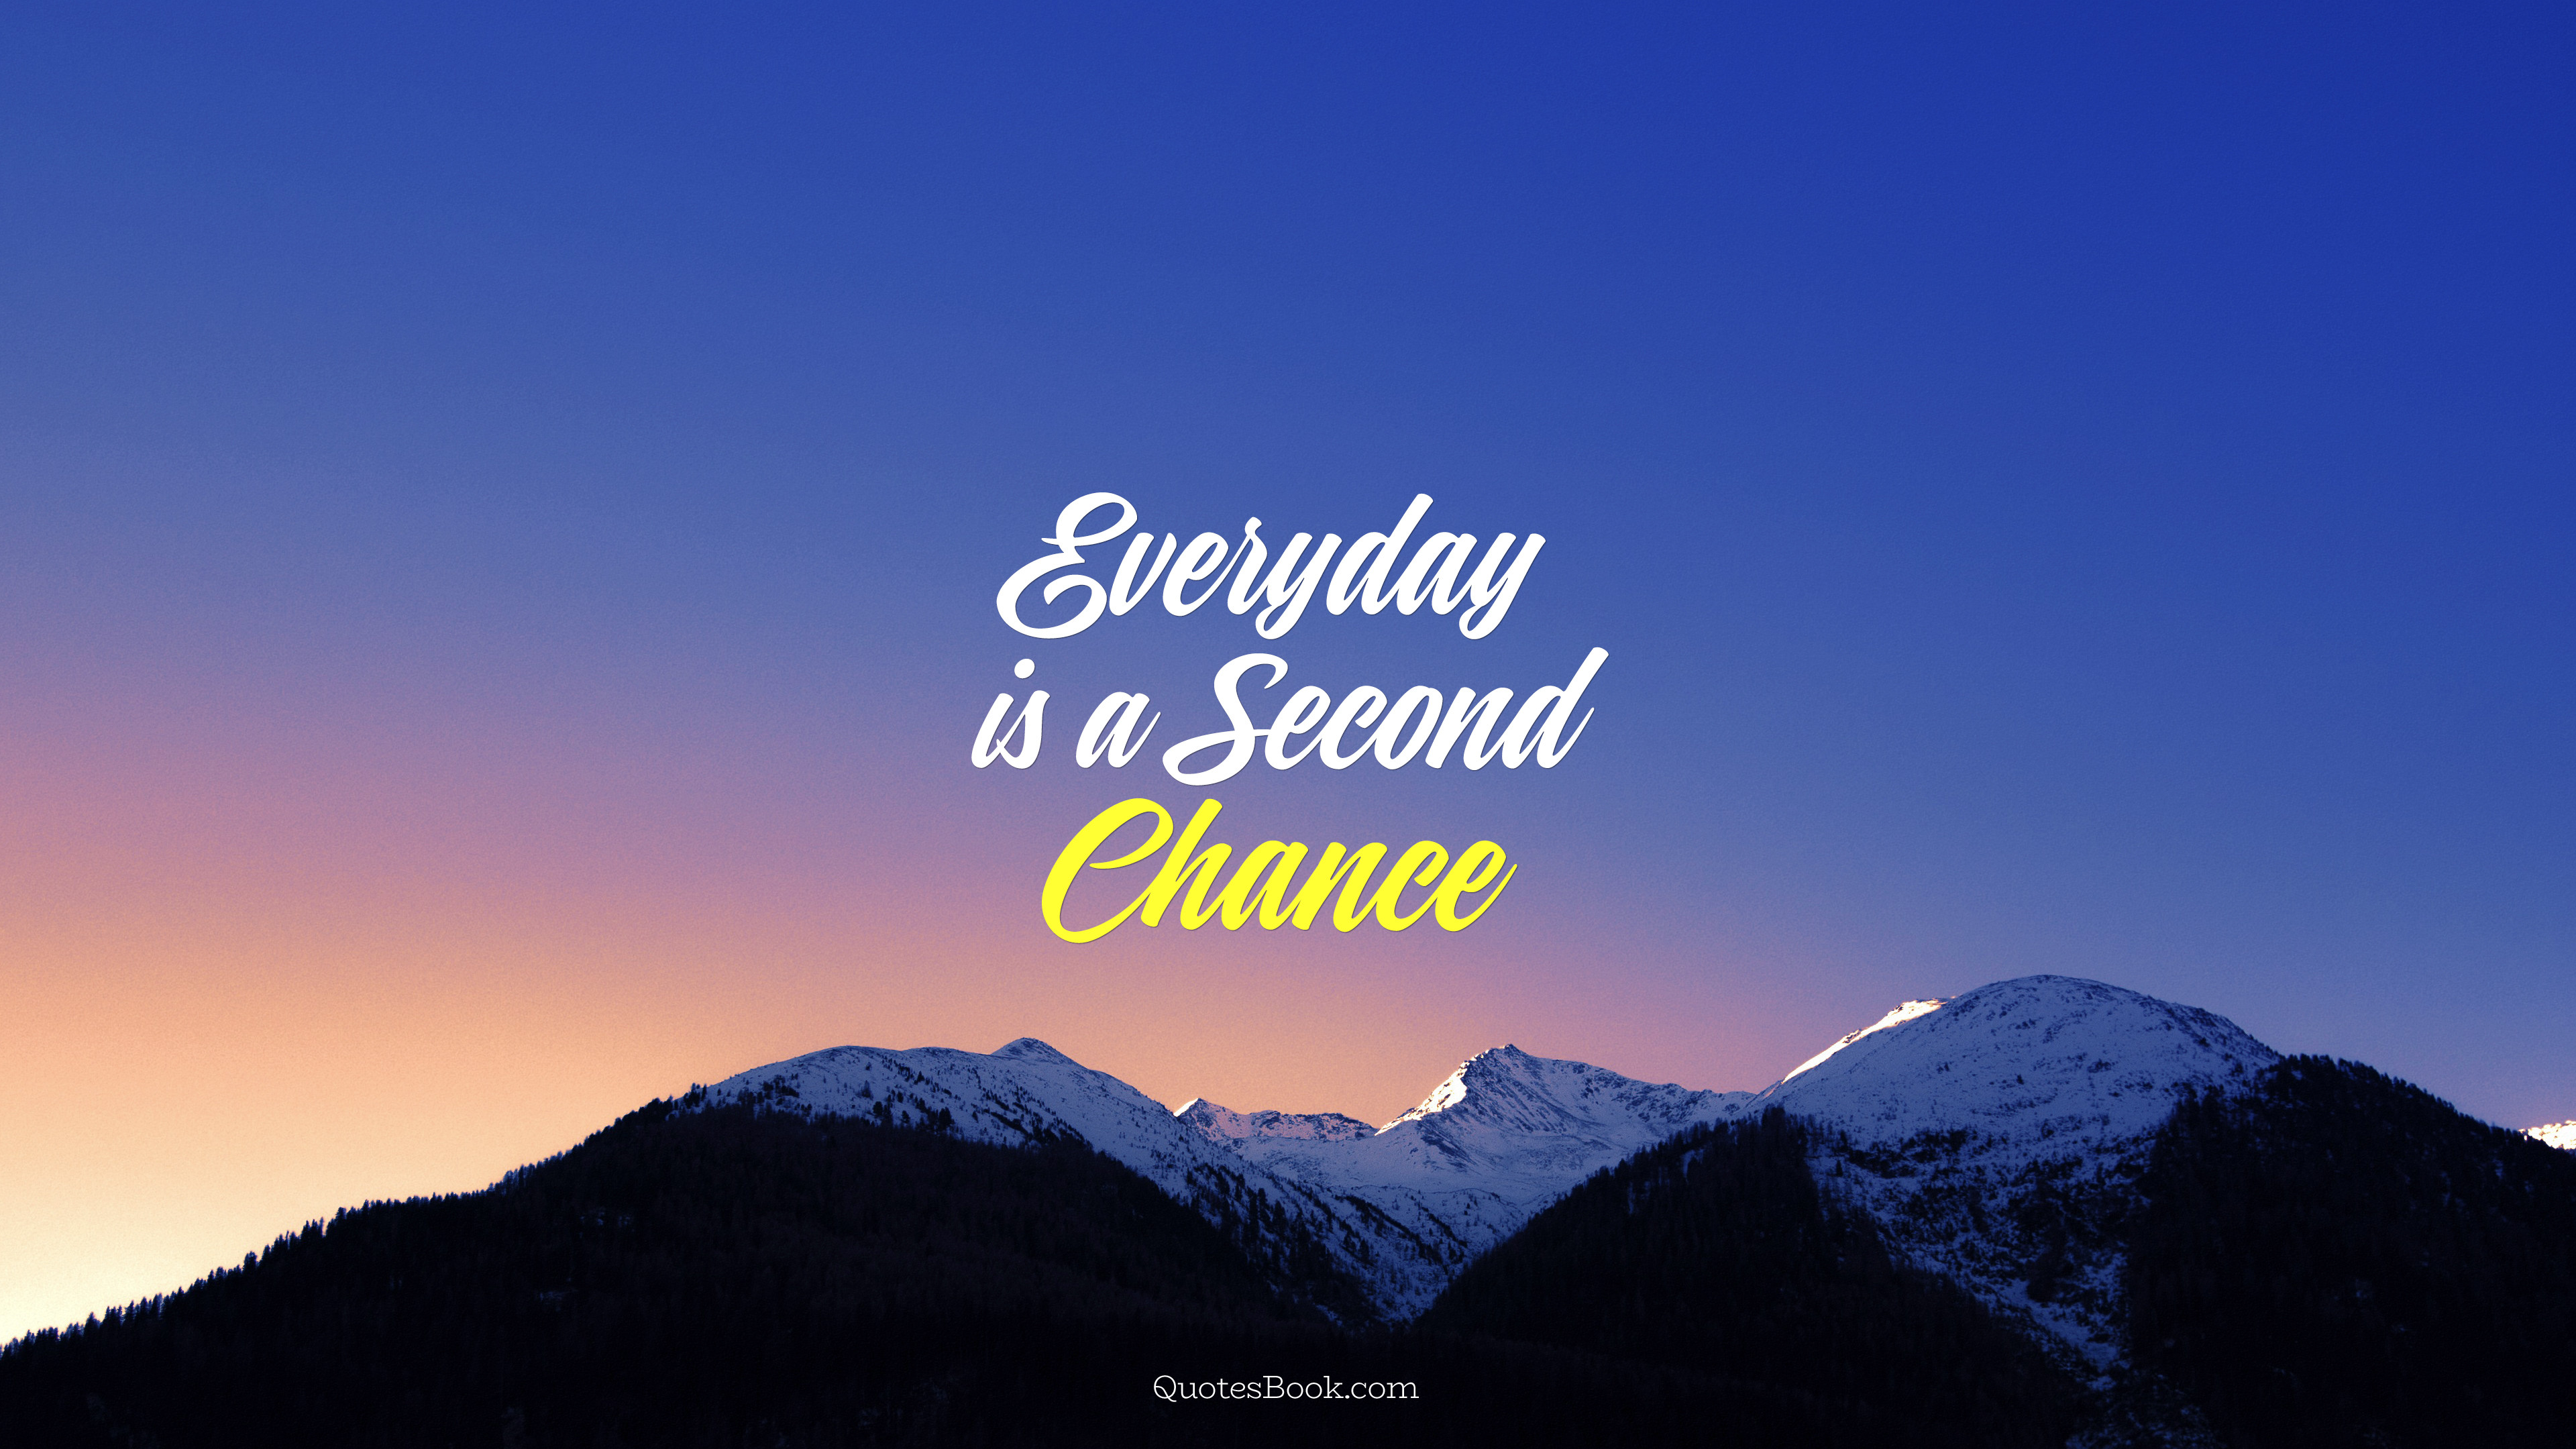 everyday is a second chance 3840x2160 1449